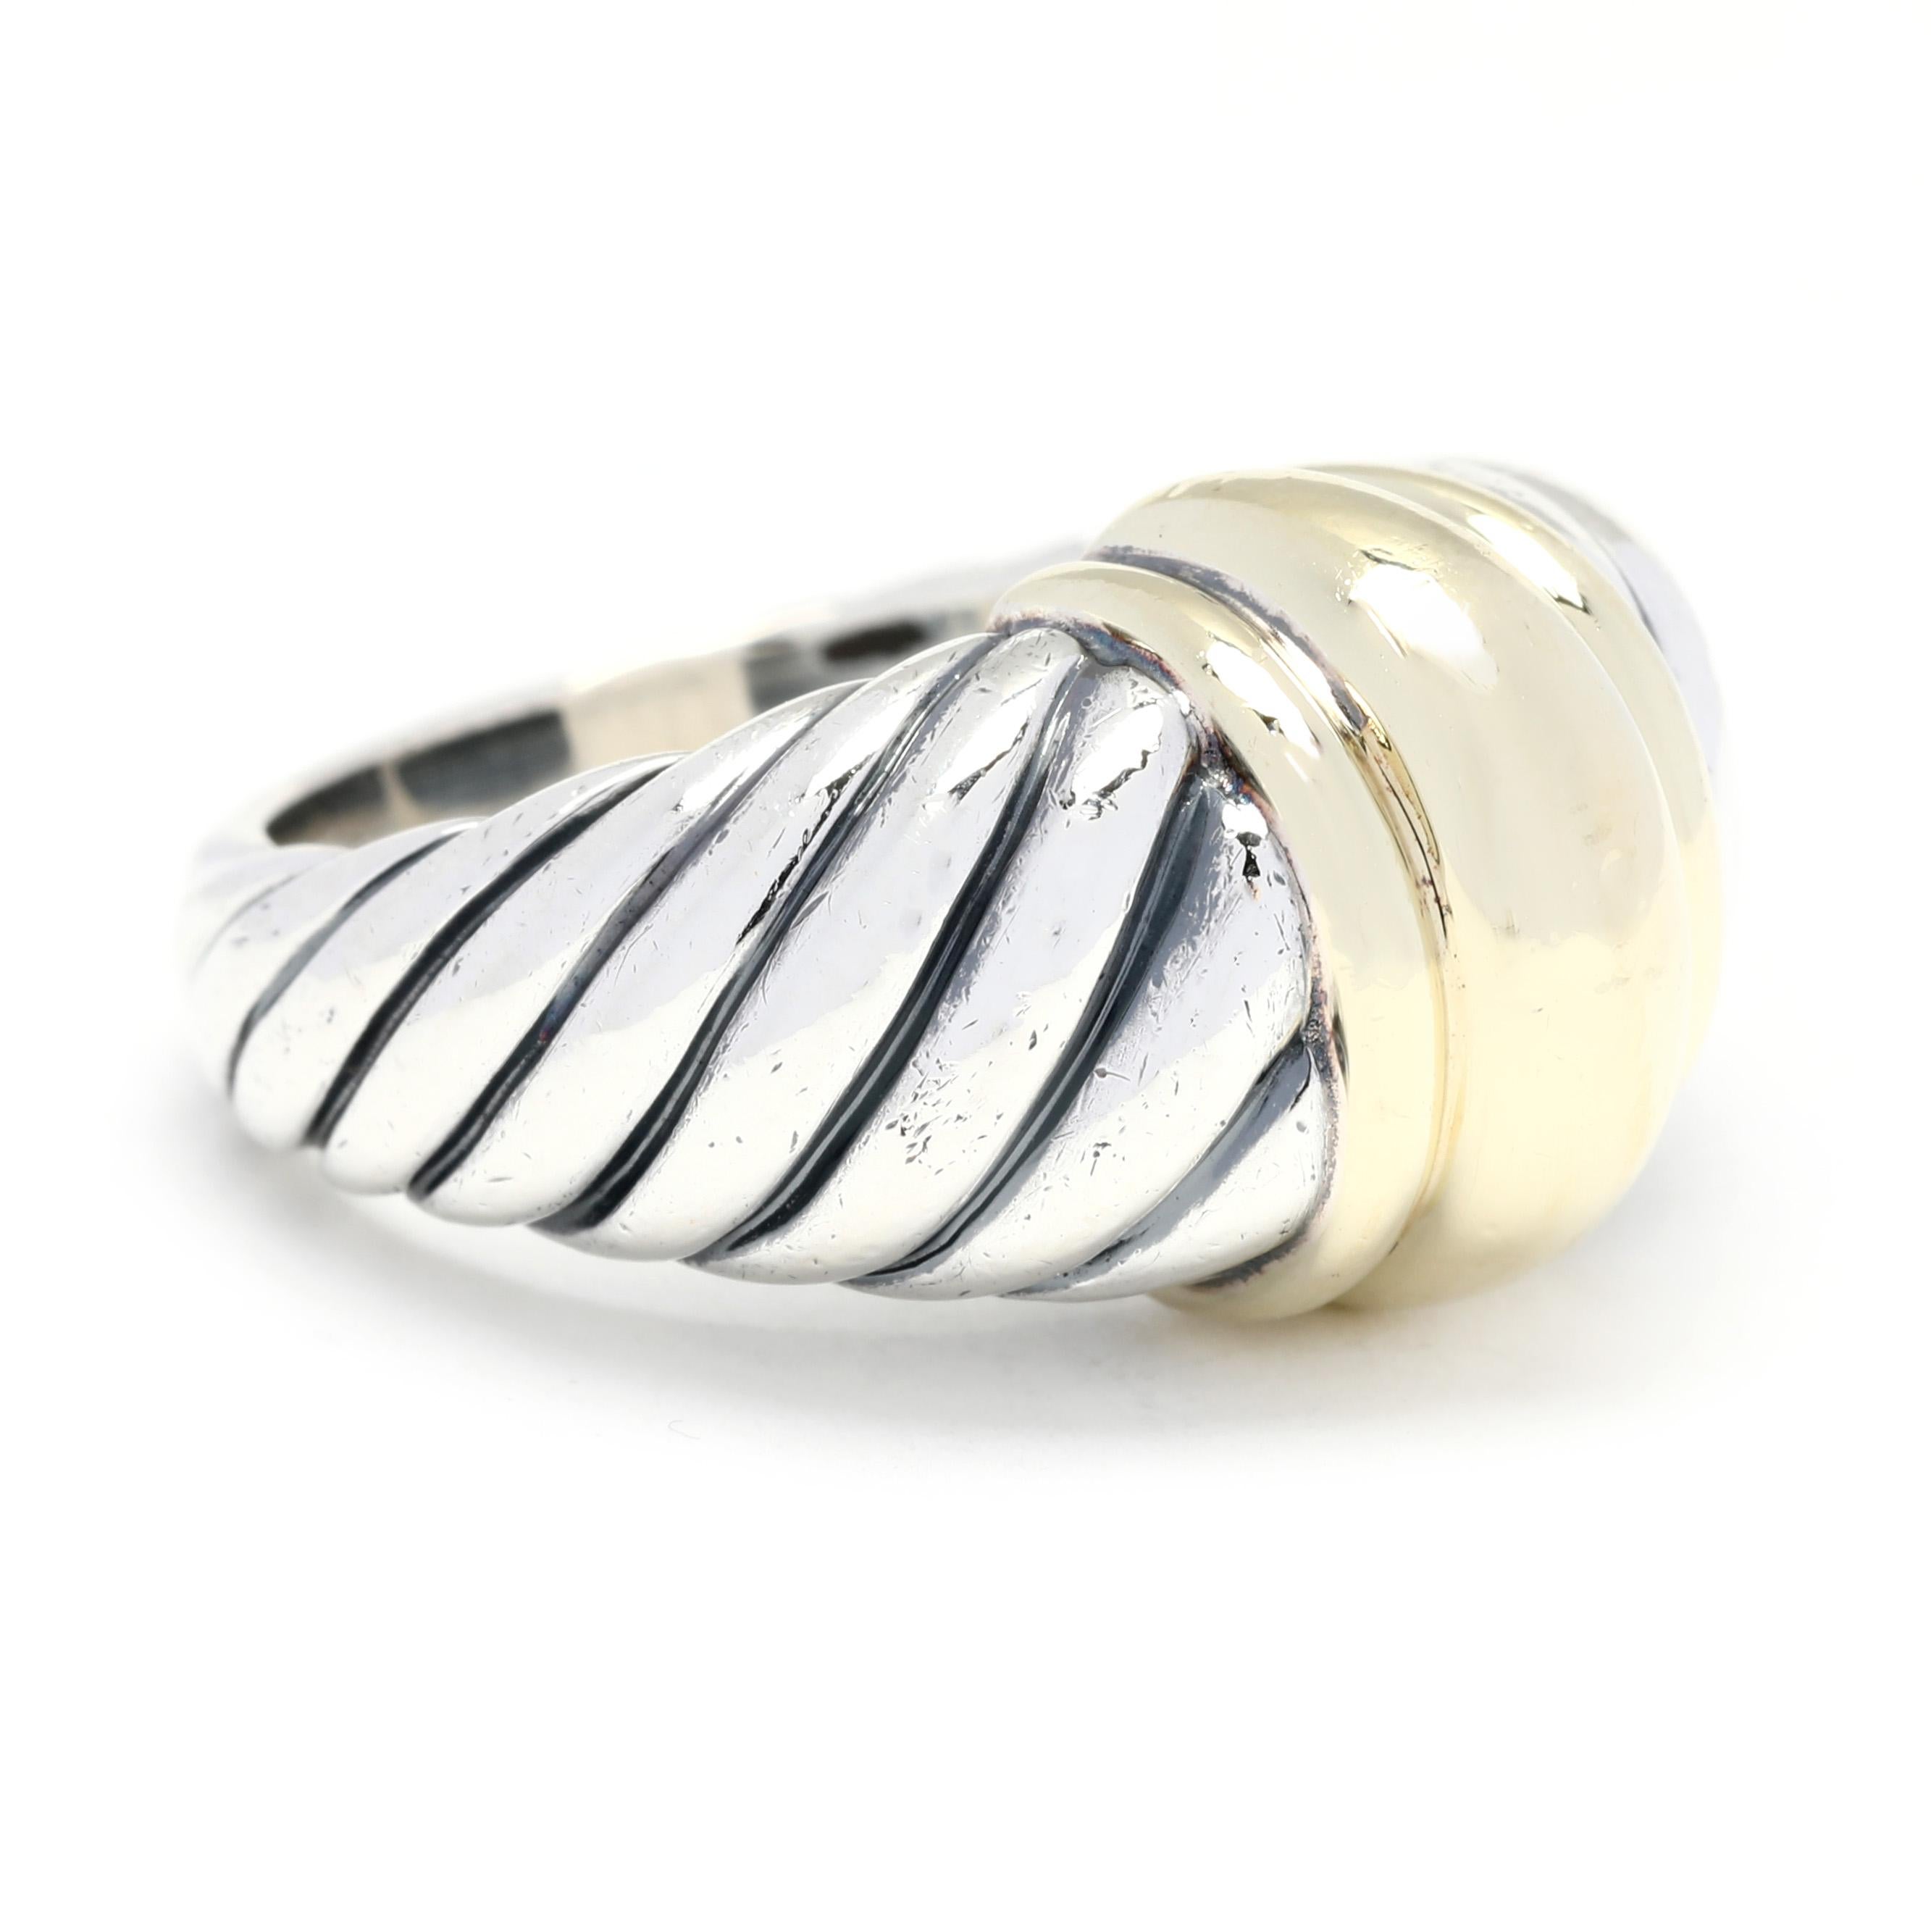 This stunning two-tone ring by David Yurman will be the star of your jewelry collection. Crafted in a 14K yellow gold and sterling silver dome design, this Thoroughbred collection dome ring is sure to impress. Its unique design combines a brilliant